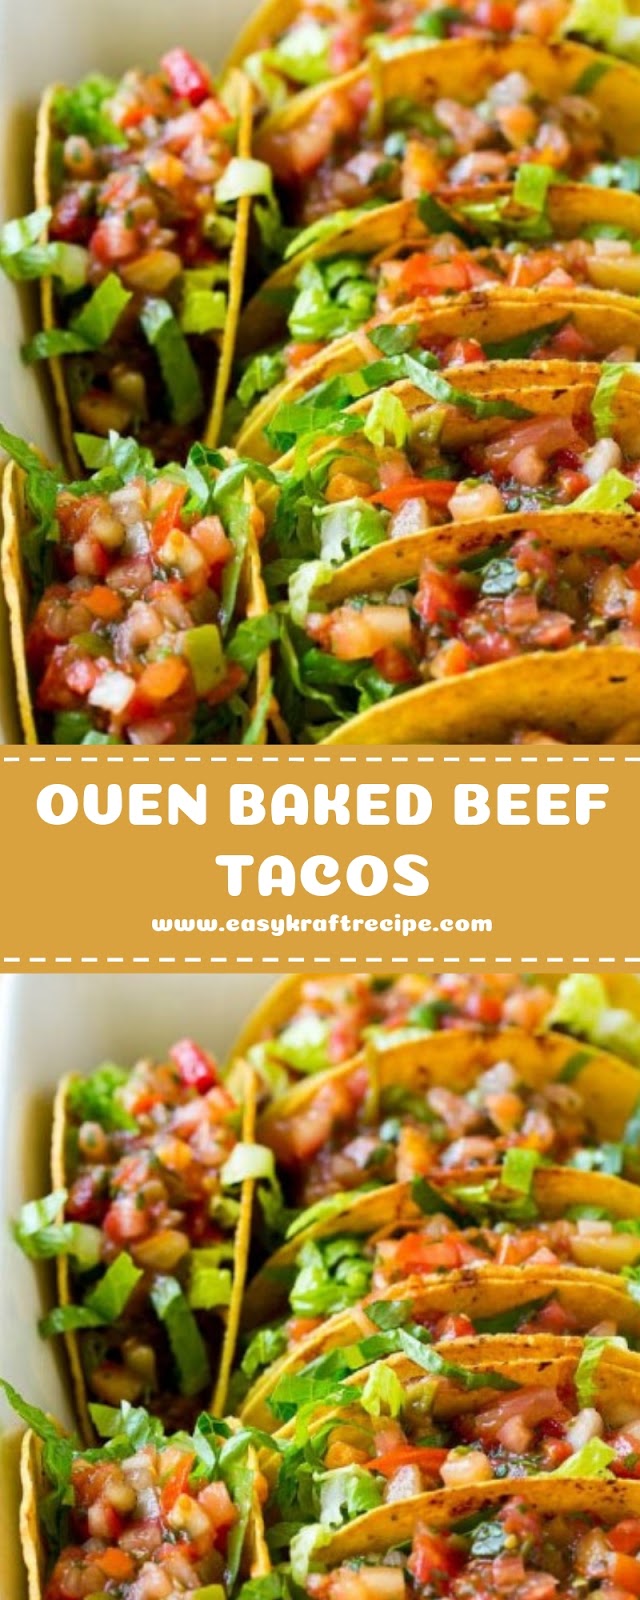 OVEN BAKED BEEF TACOS